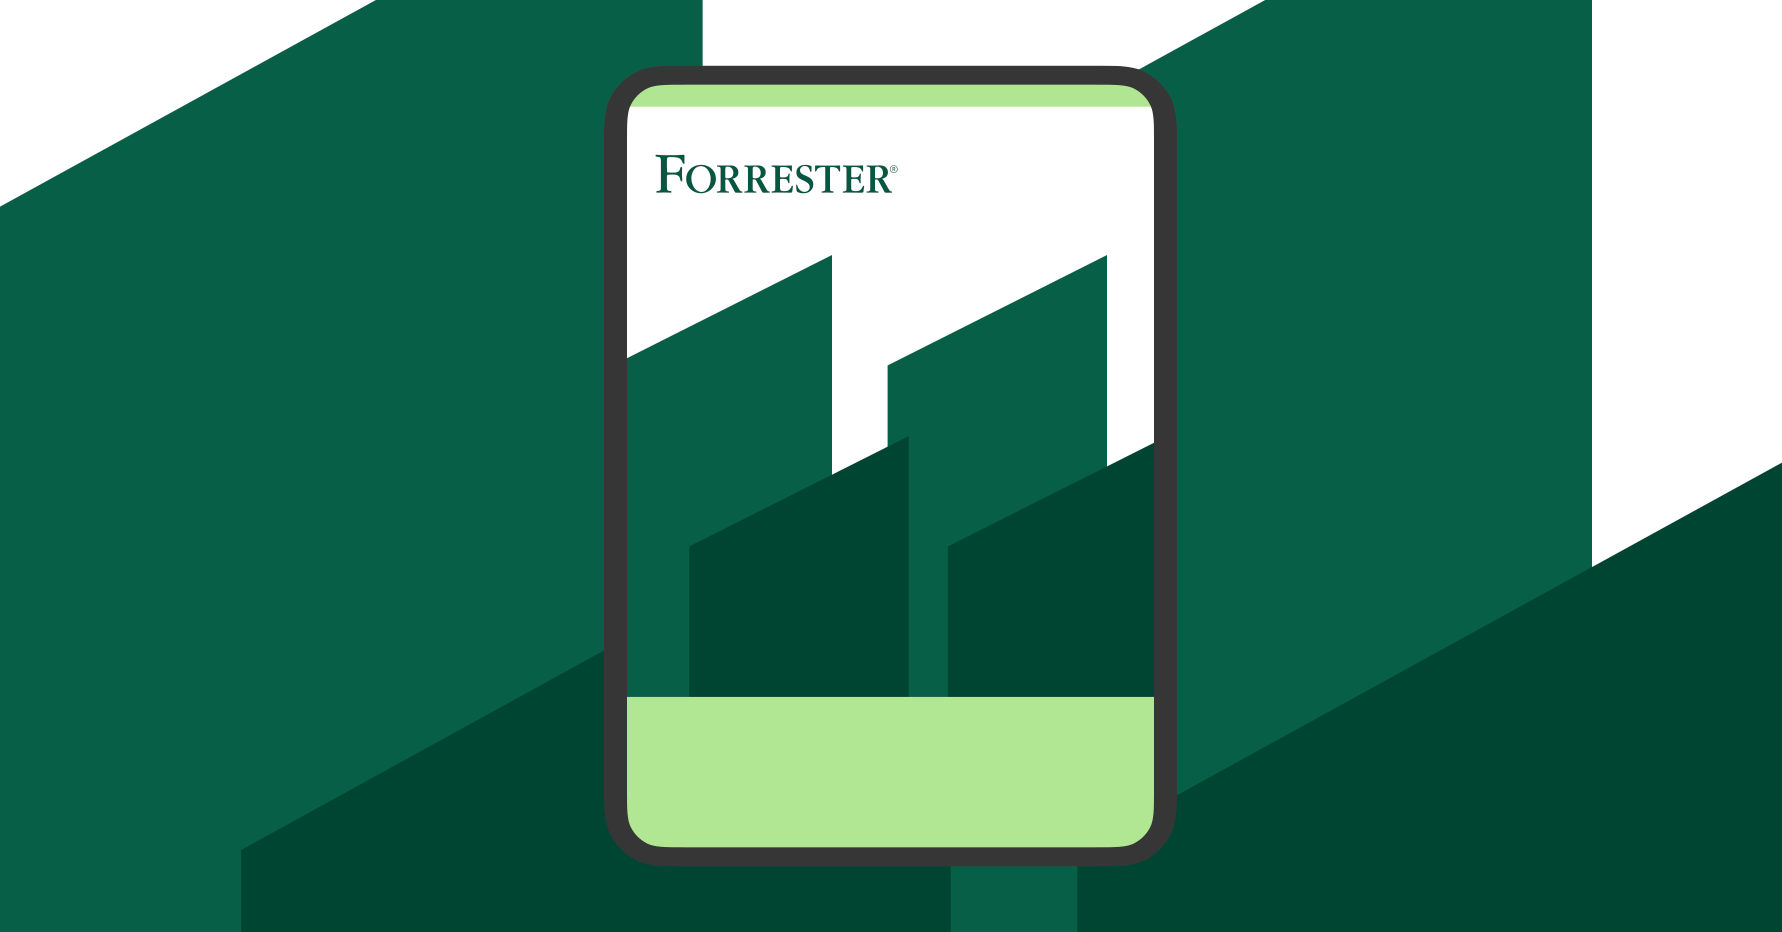 Illustration of a Forrester report on a tablet on a dark green background